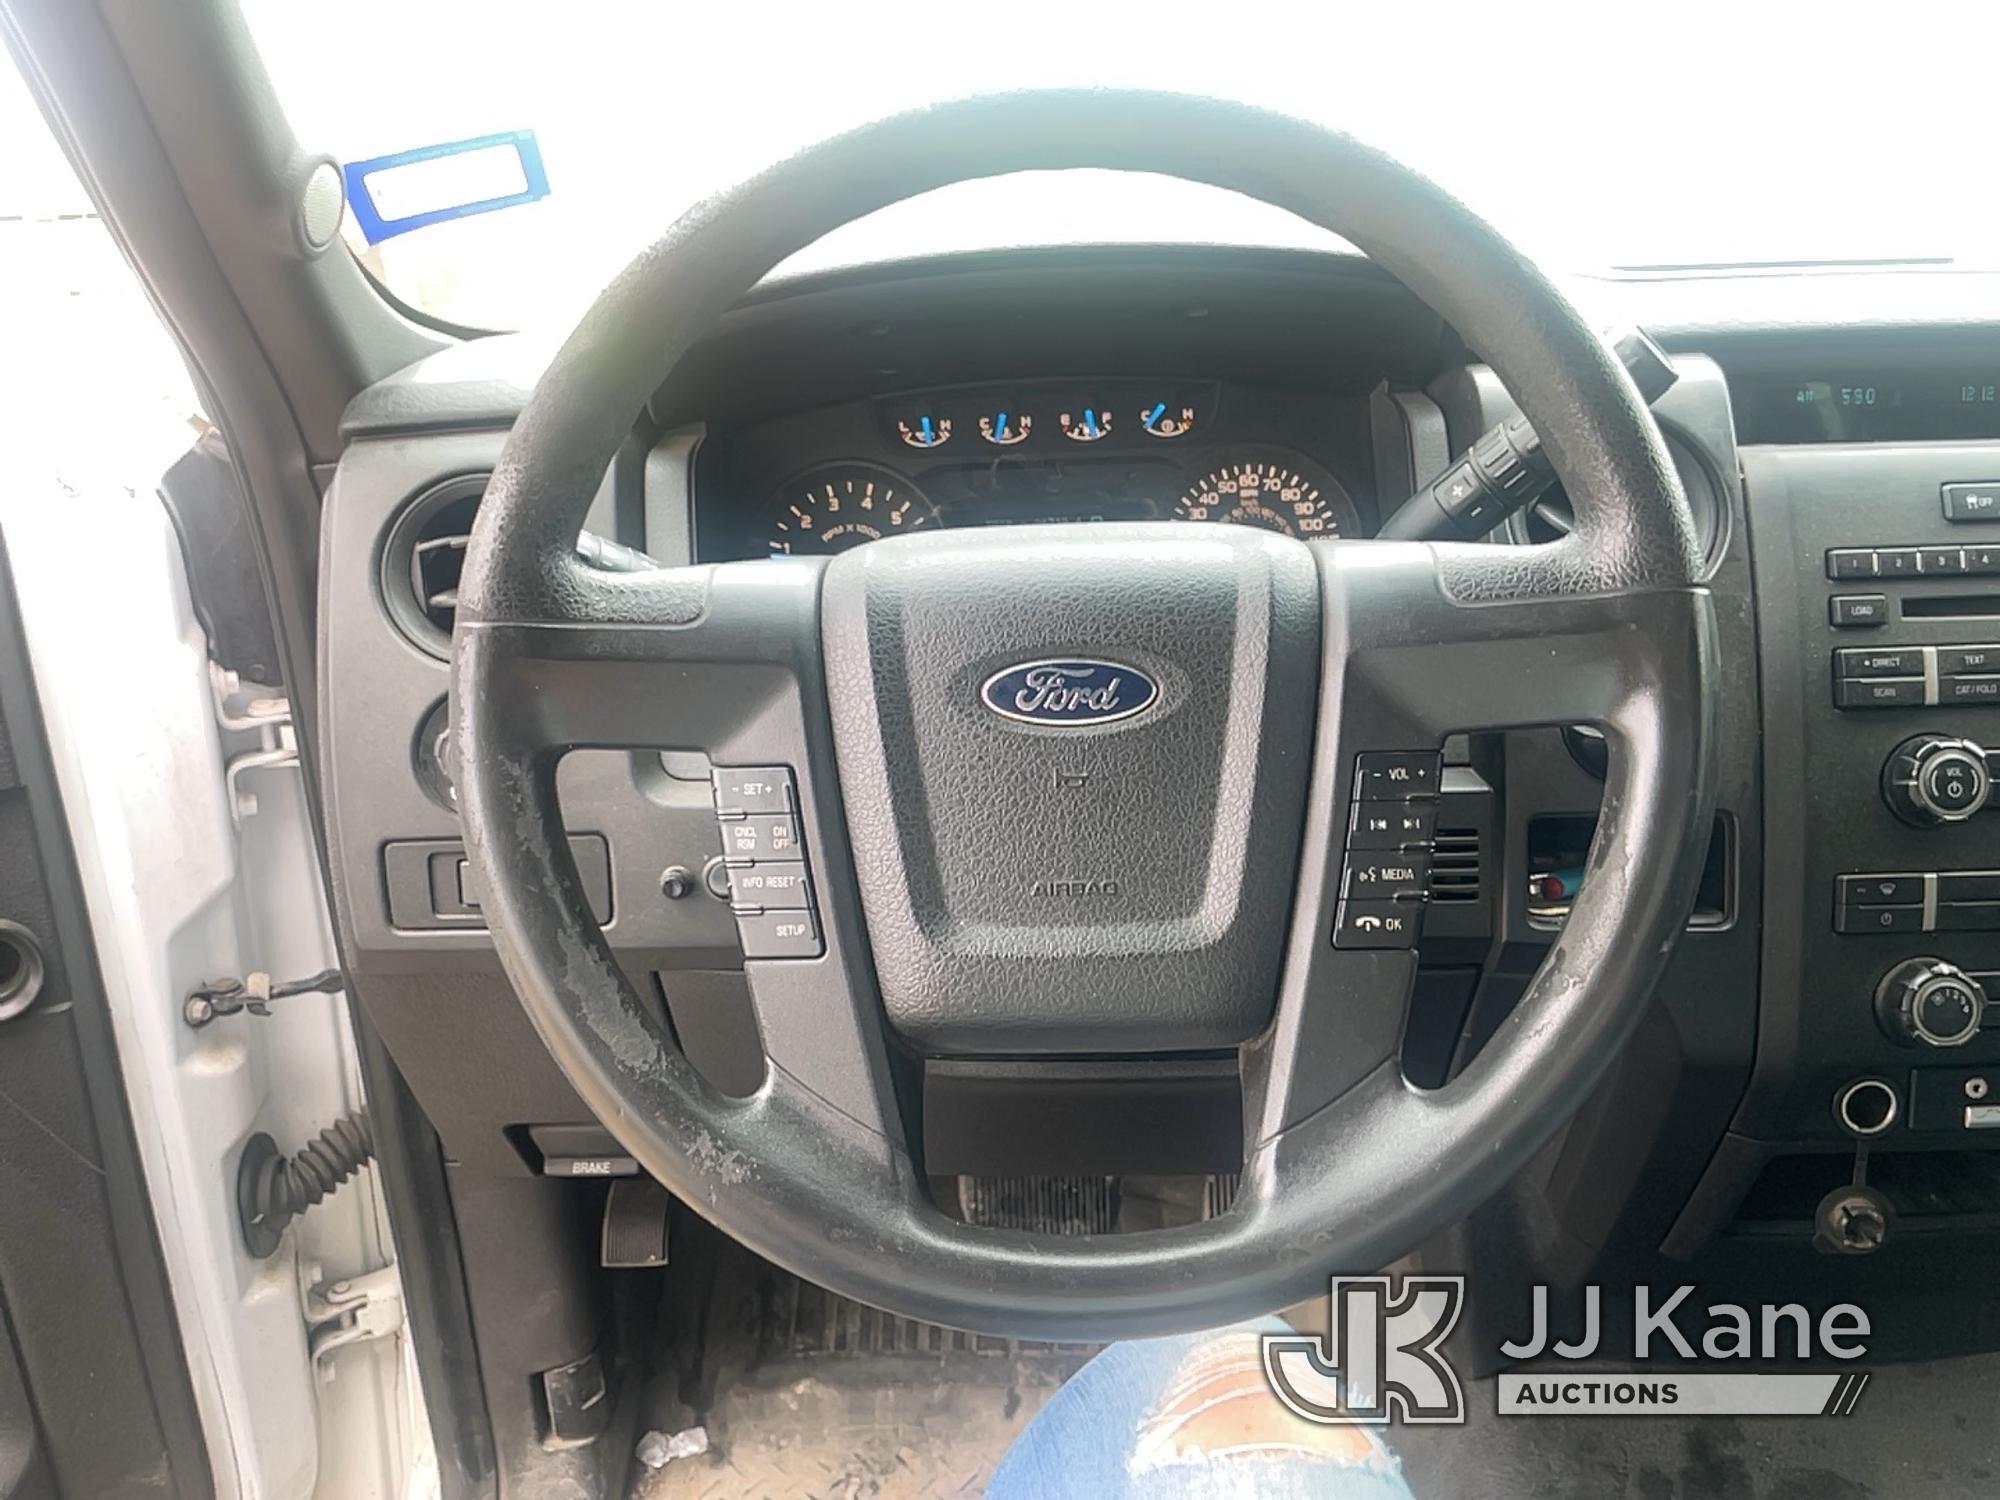 (Temple, TX) 2014 Ford F150 Pickup Truck Runs and Moves